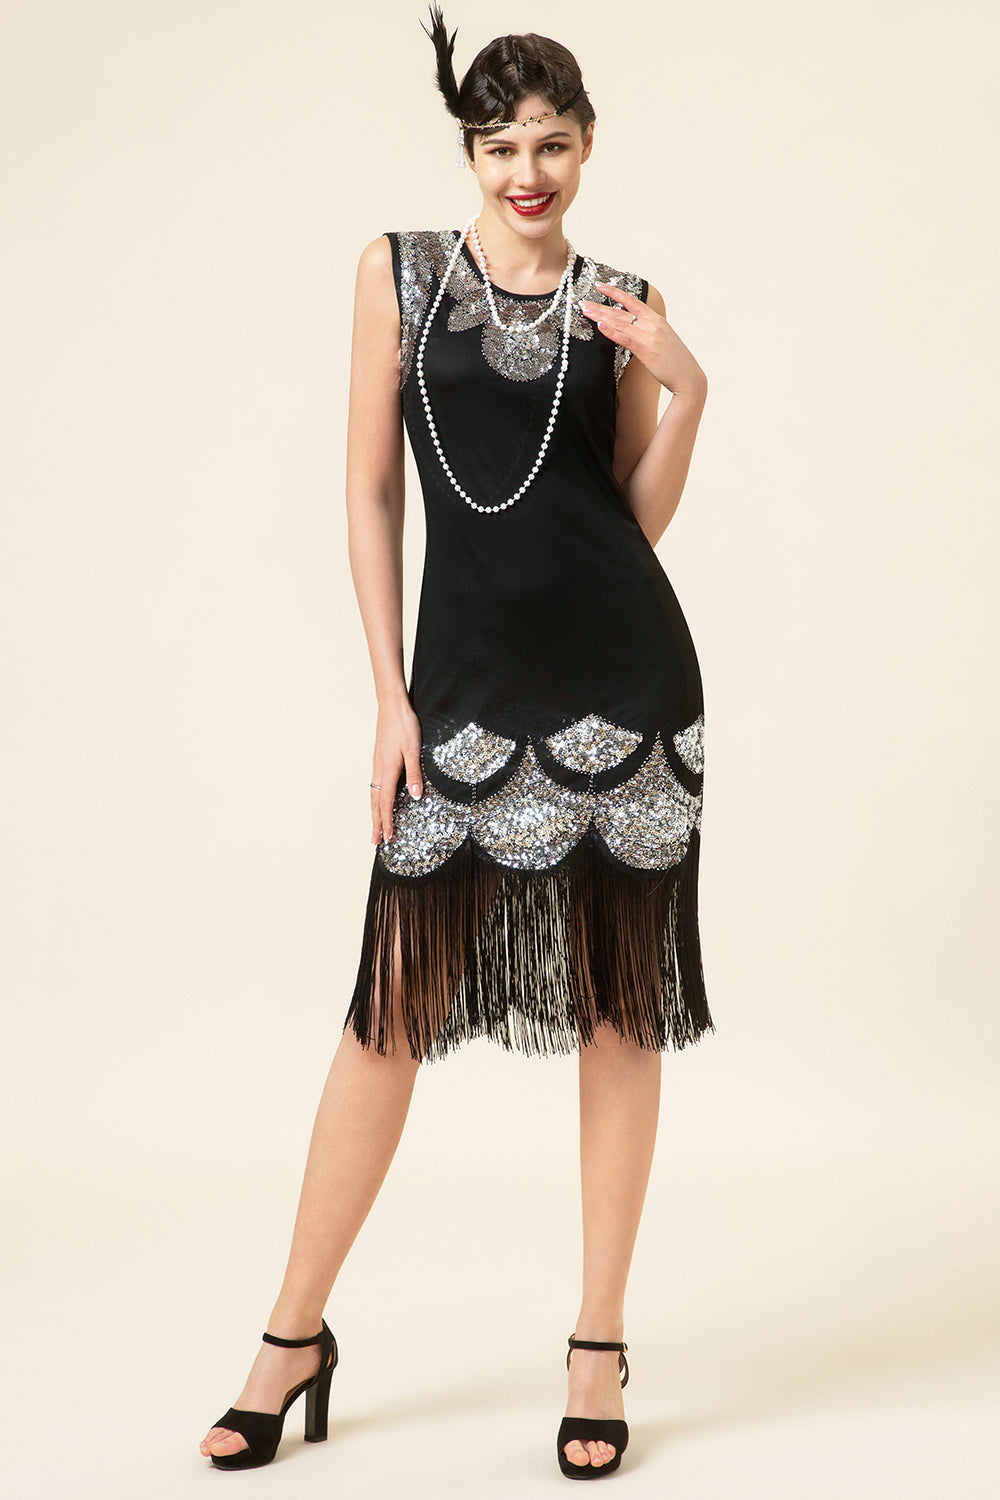 Black and Silver Sequined Fringes 1920s Gatsby Flapper Dress with 20s Accessories Set